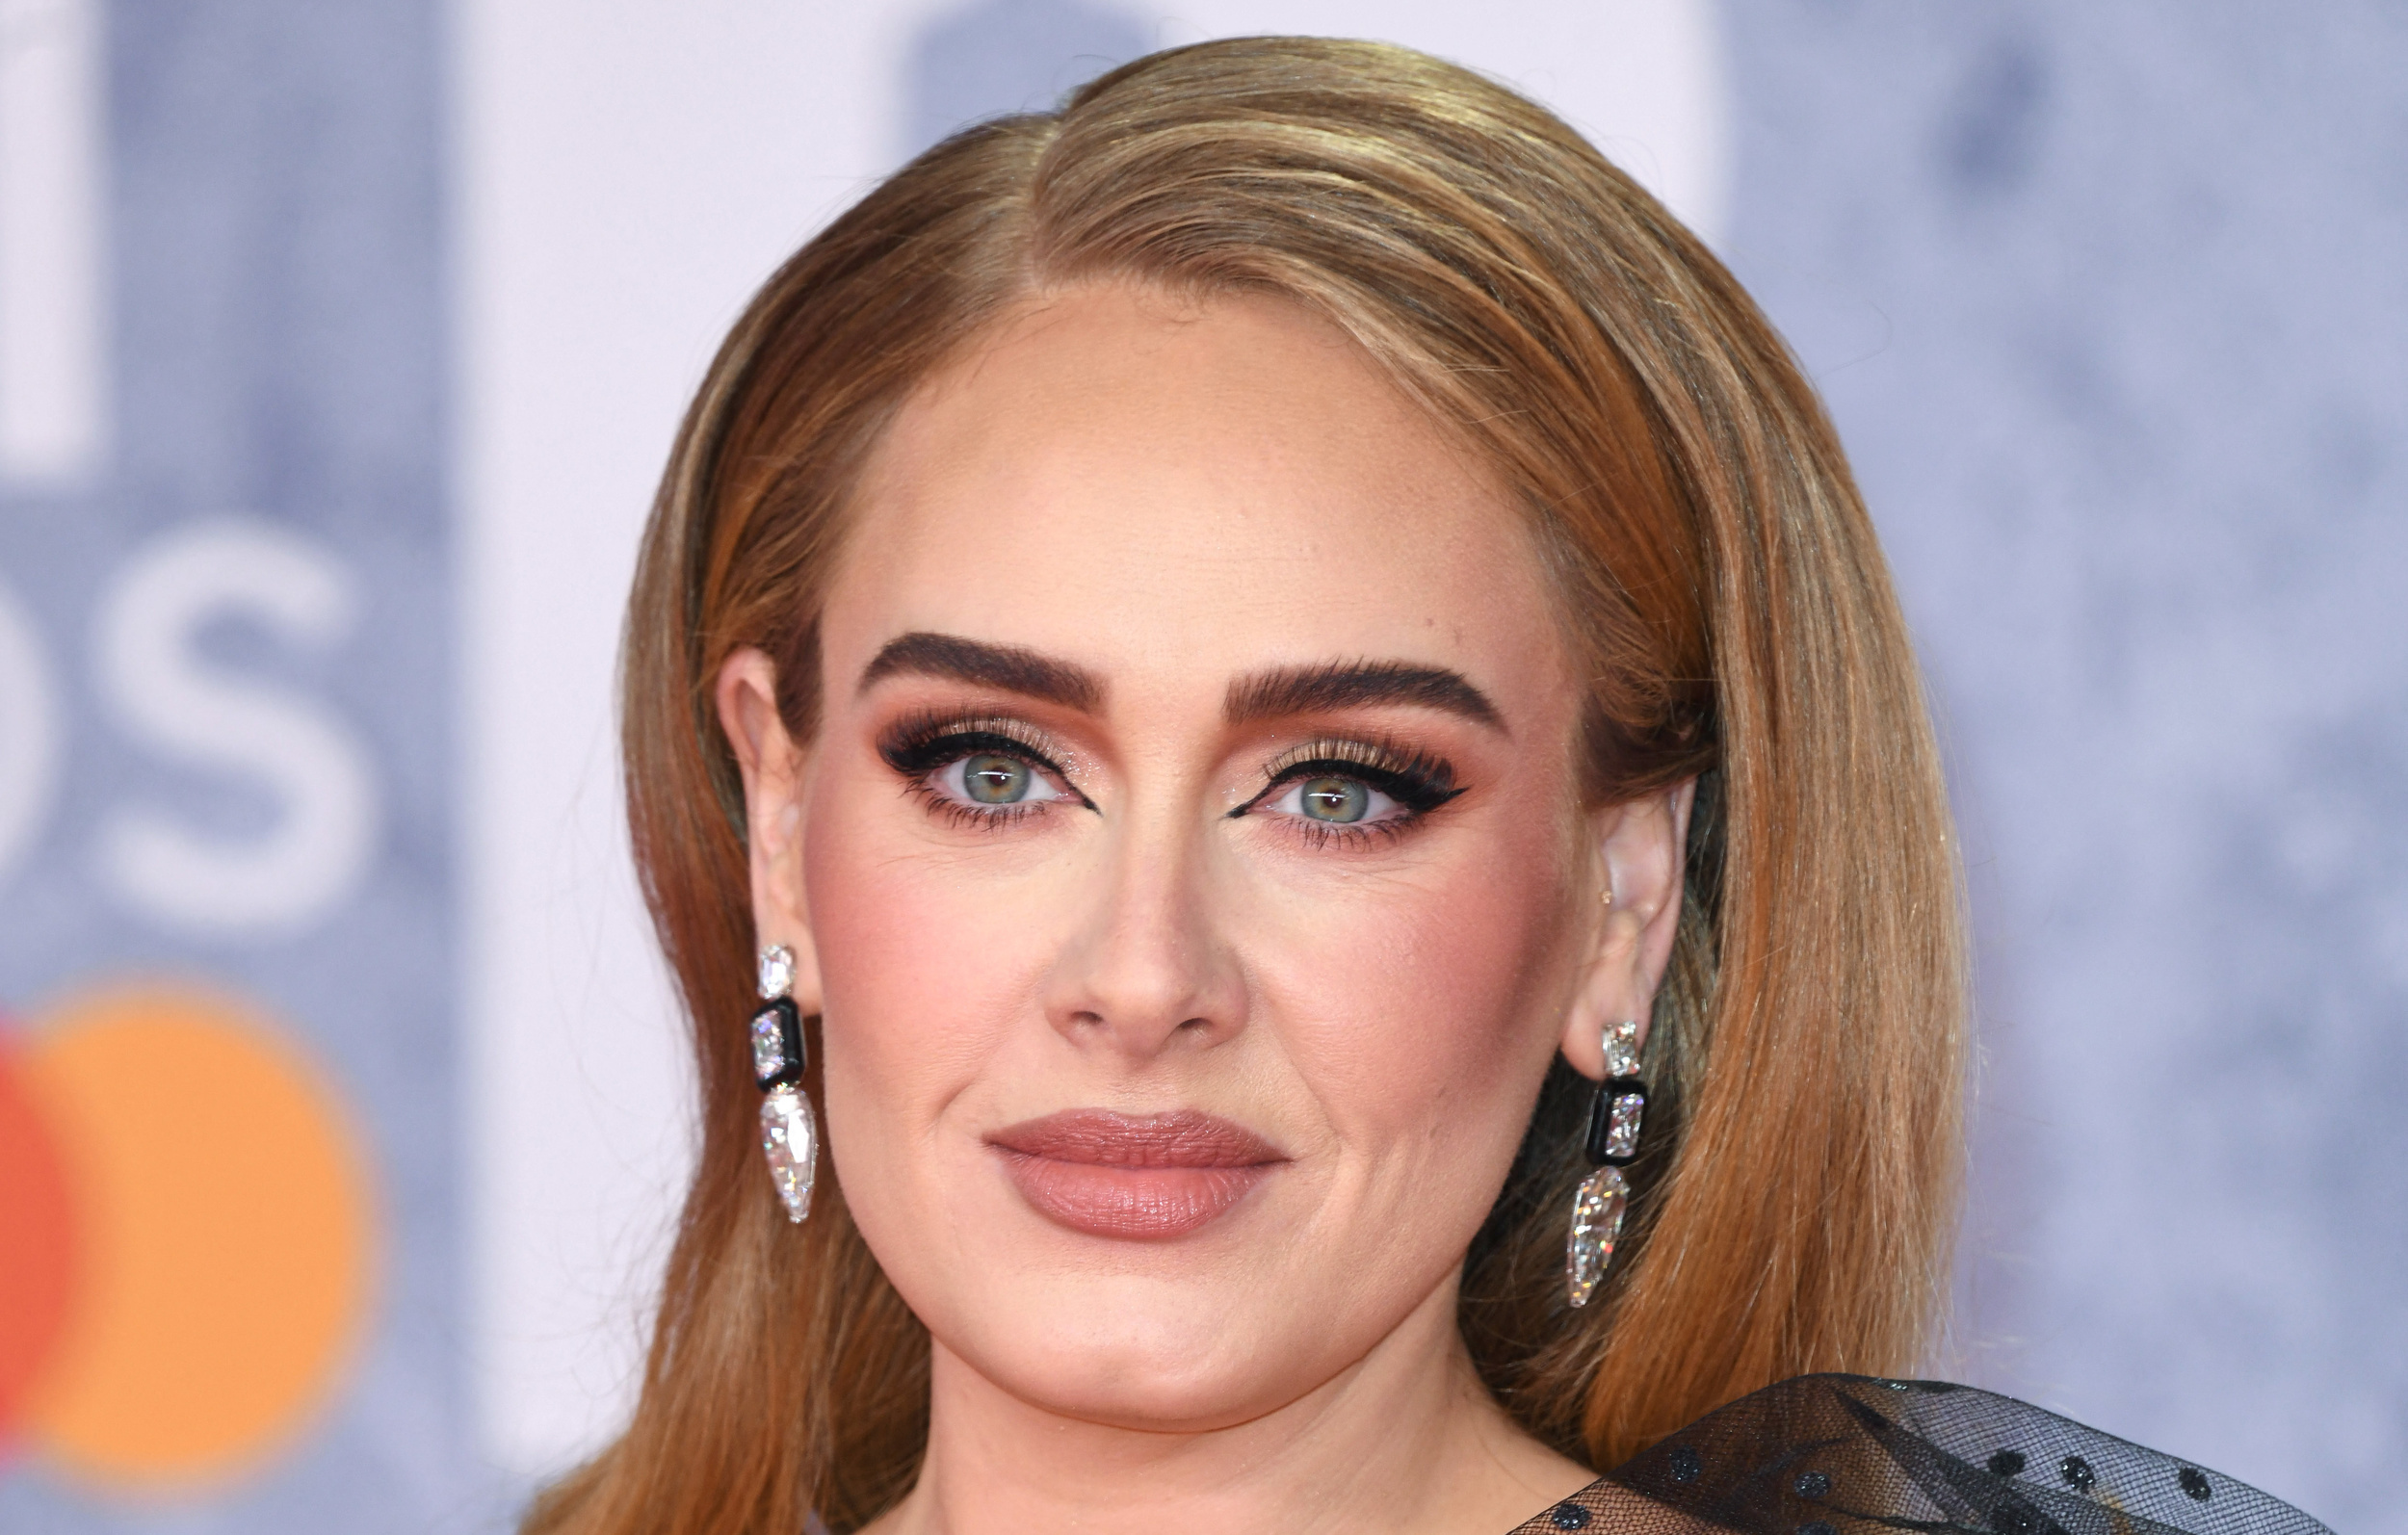 <p>You could add any Adele song to your road trip playlist, but "Set Fire To The Rain" is one of our favorites. It has the perfect pre-chorus, leading to the most explosive part of the song: "I SET FIRE TO THE RAIN."</p><p><a href='https://www.msn.com/en-us/community/channel/vid-cj9pqbr0vn9in2b6ddcd8sfgpfq6x6utp44fssrv6mc2gtybw0us'>Follow us on MSN to see more of our exclusive entertainment content.</a></p>